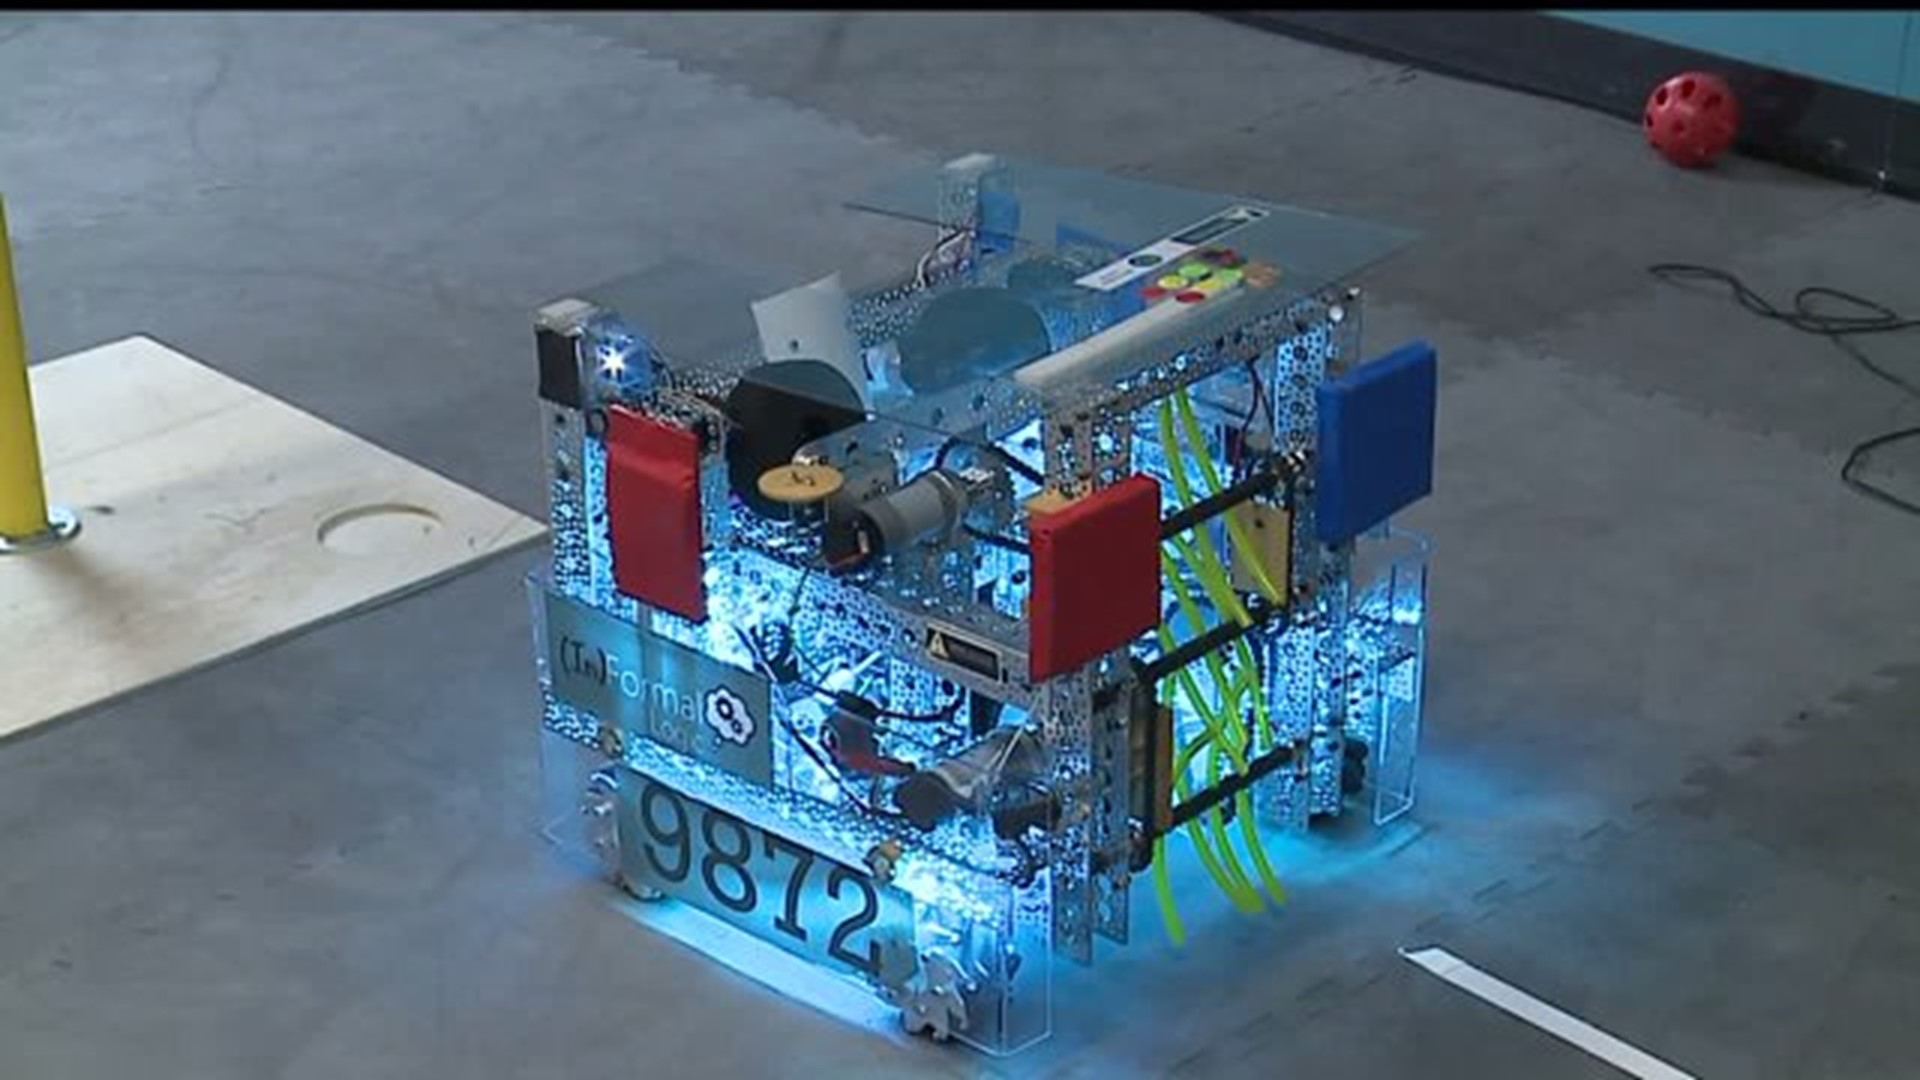 Local students test their robotic creations ahead of upcoming competition